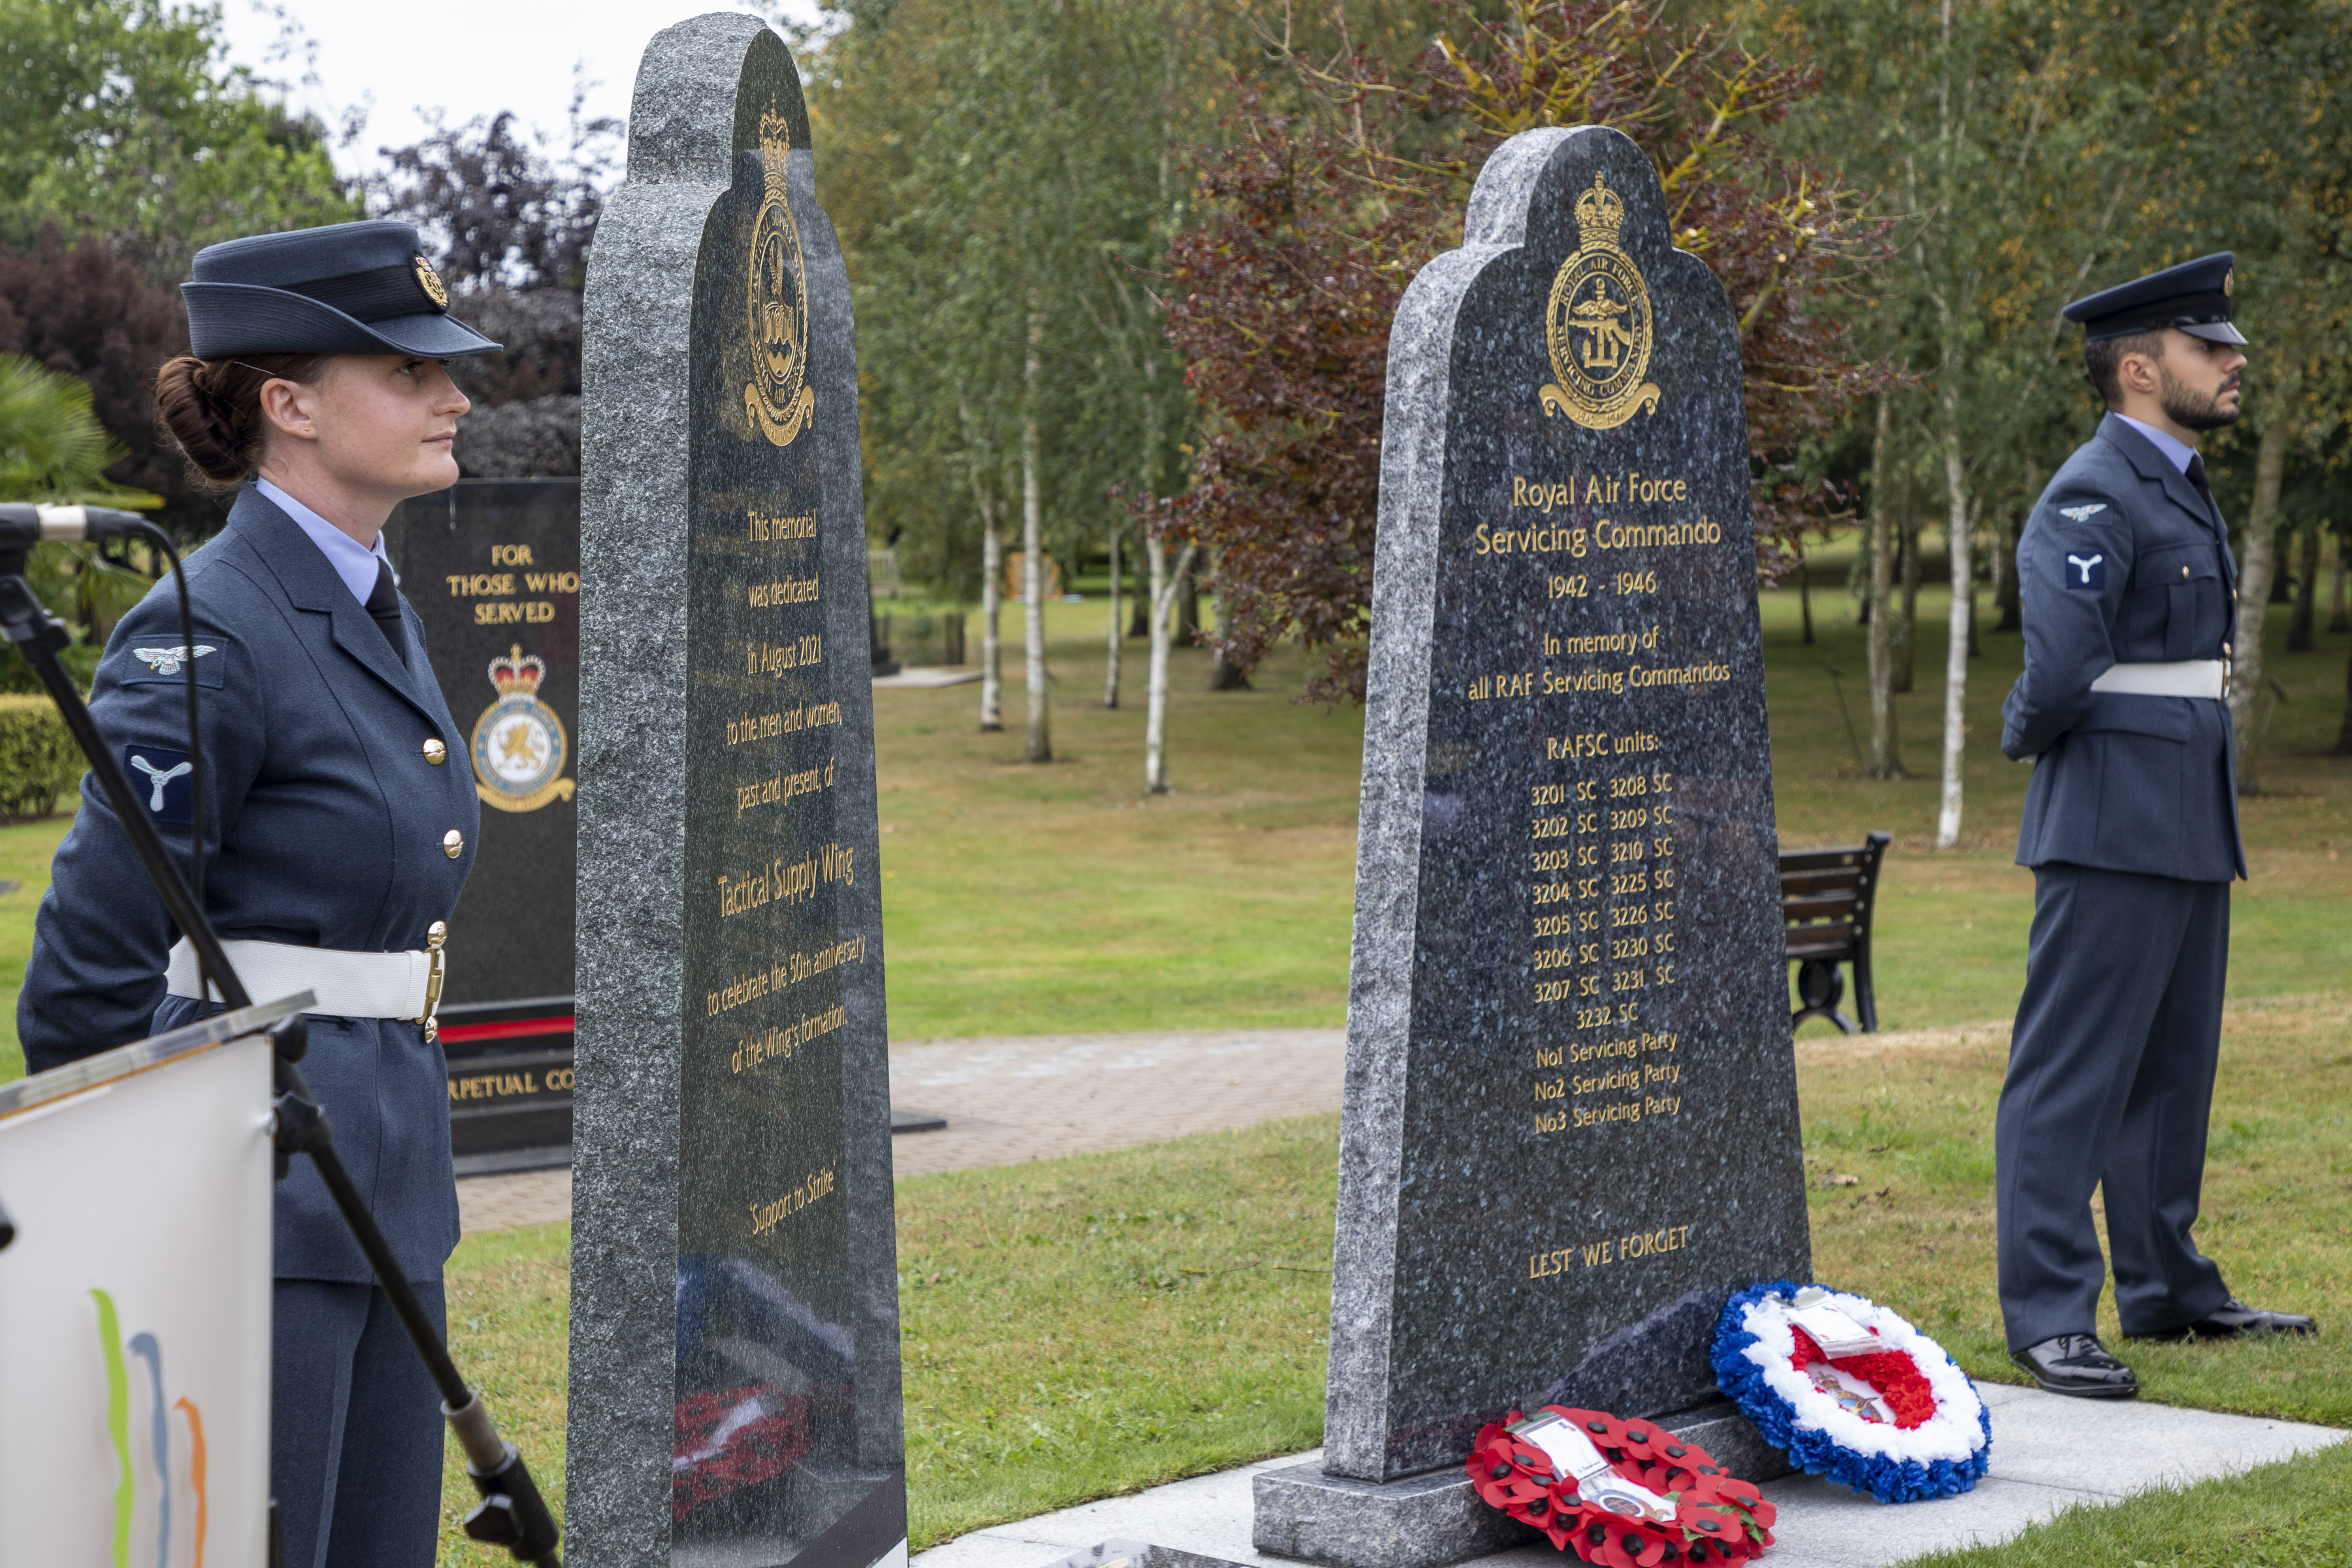 Personnel stand by memorial stone.